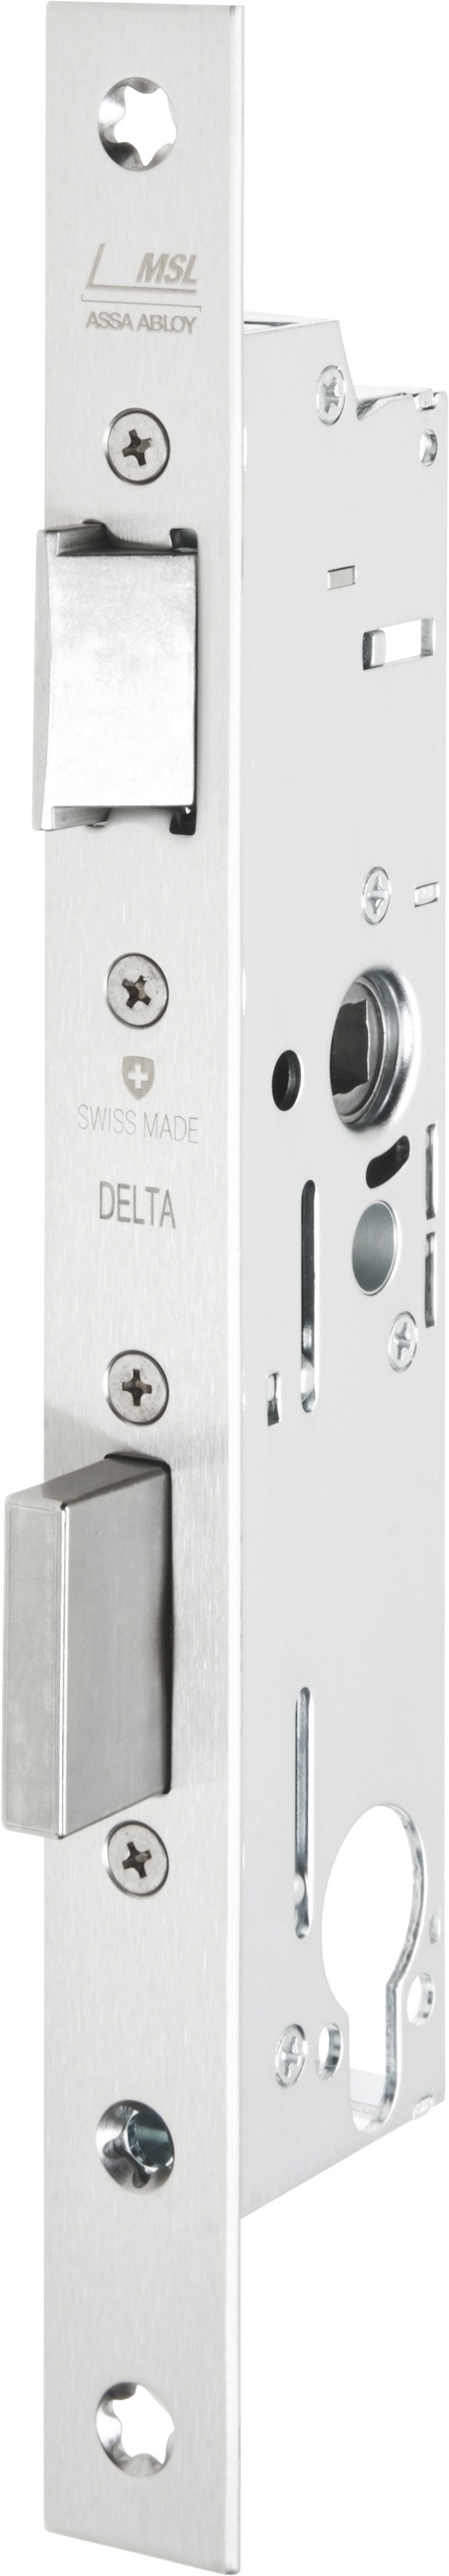 Delta security mortise lock 19421